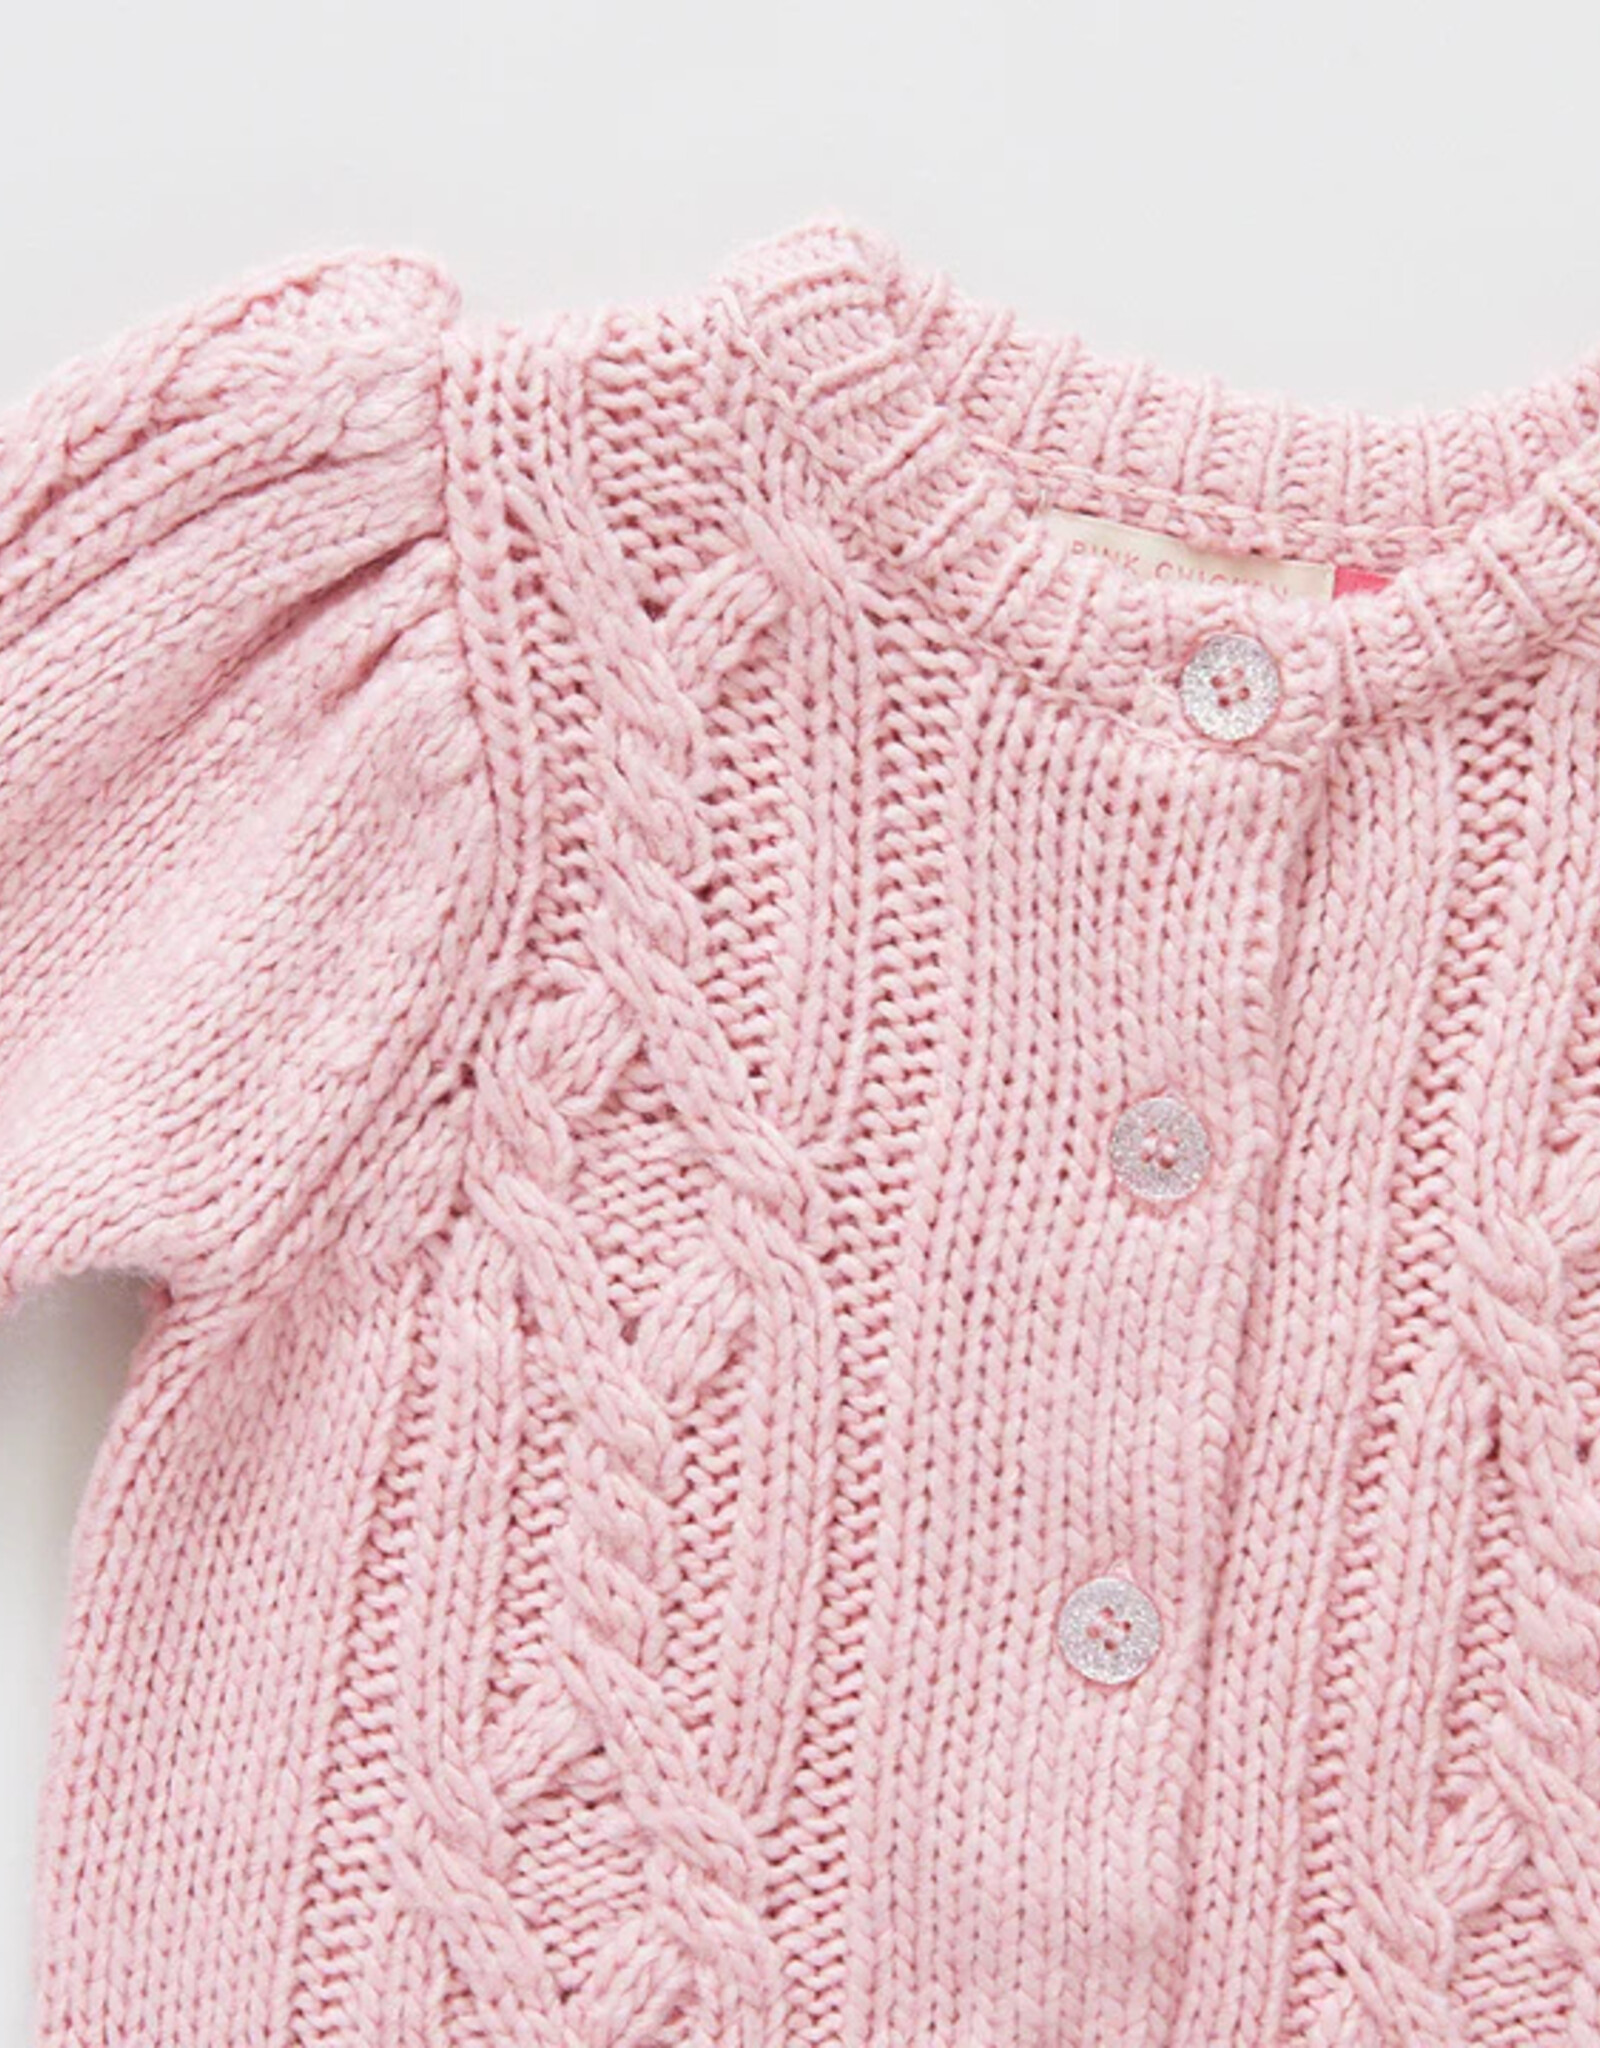 Pink Chicken girls cable constance sweater- dusty rose